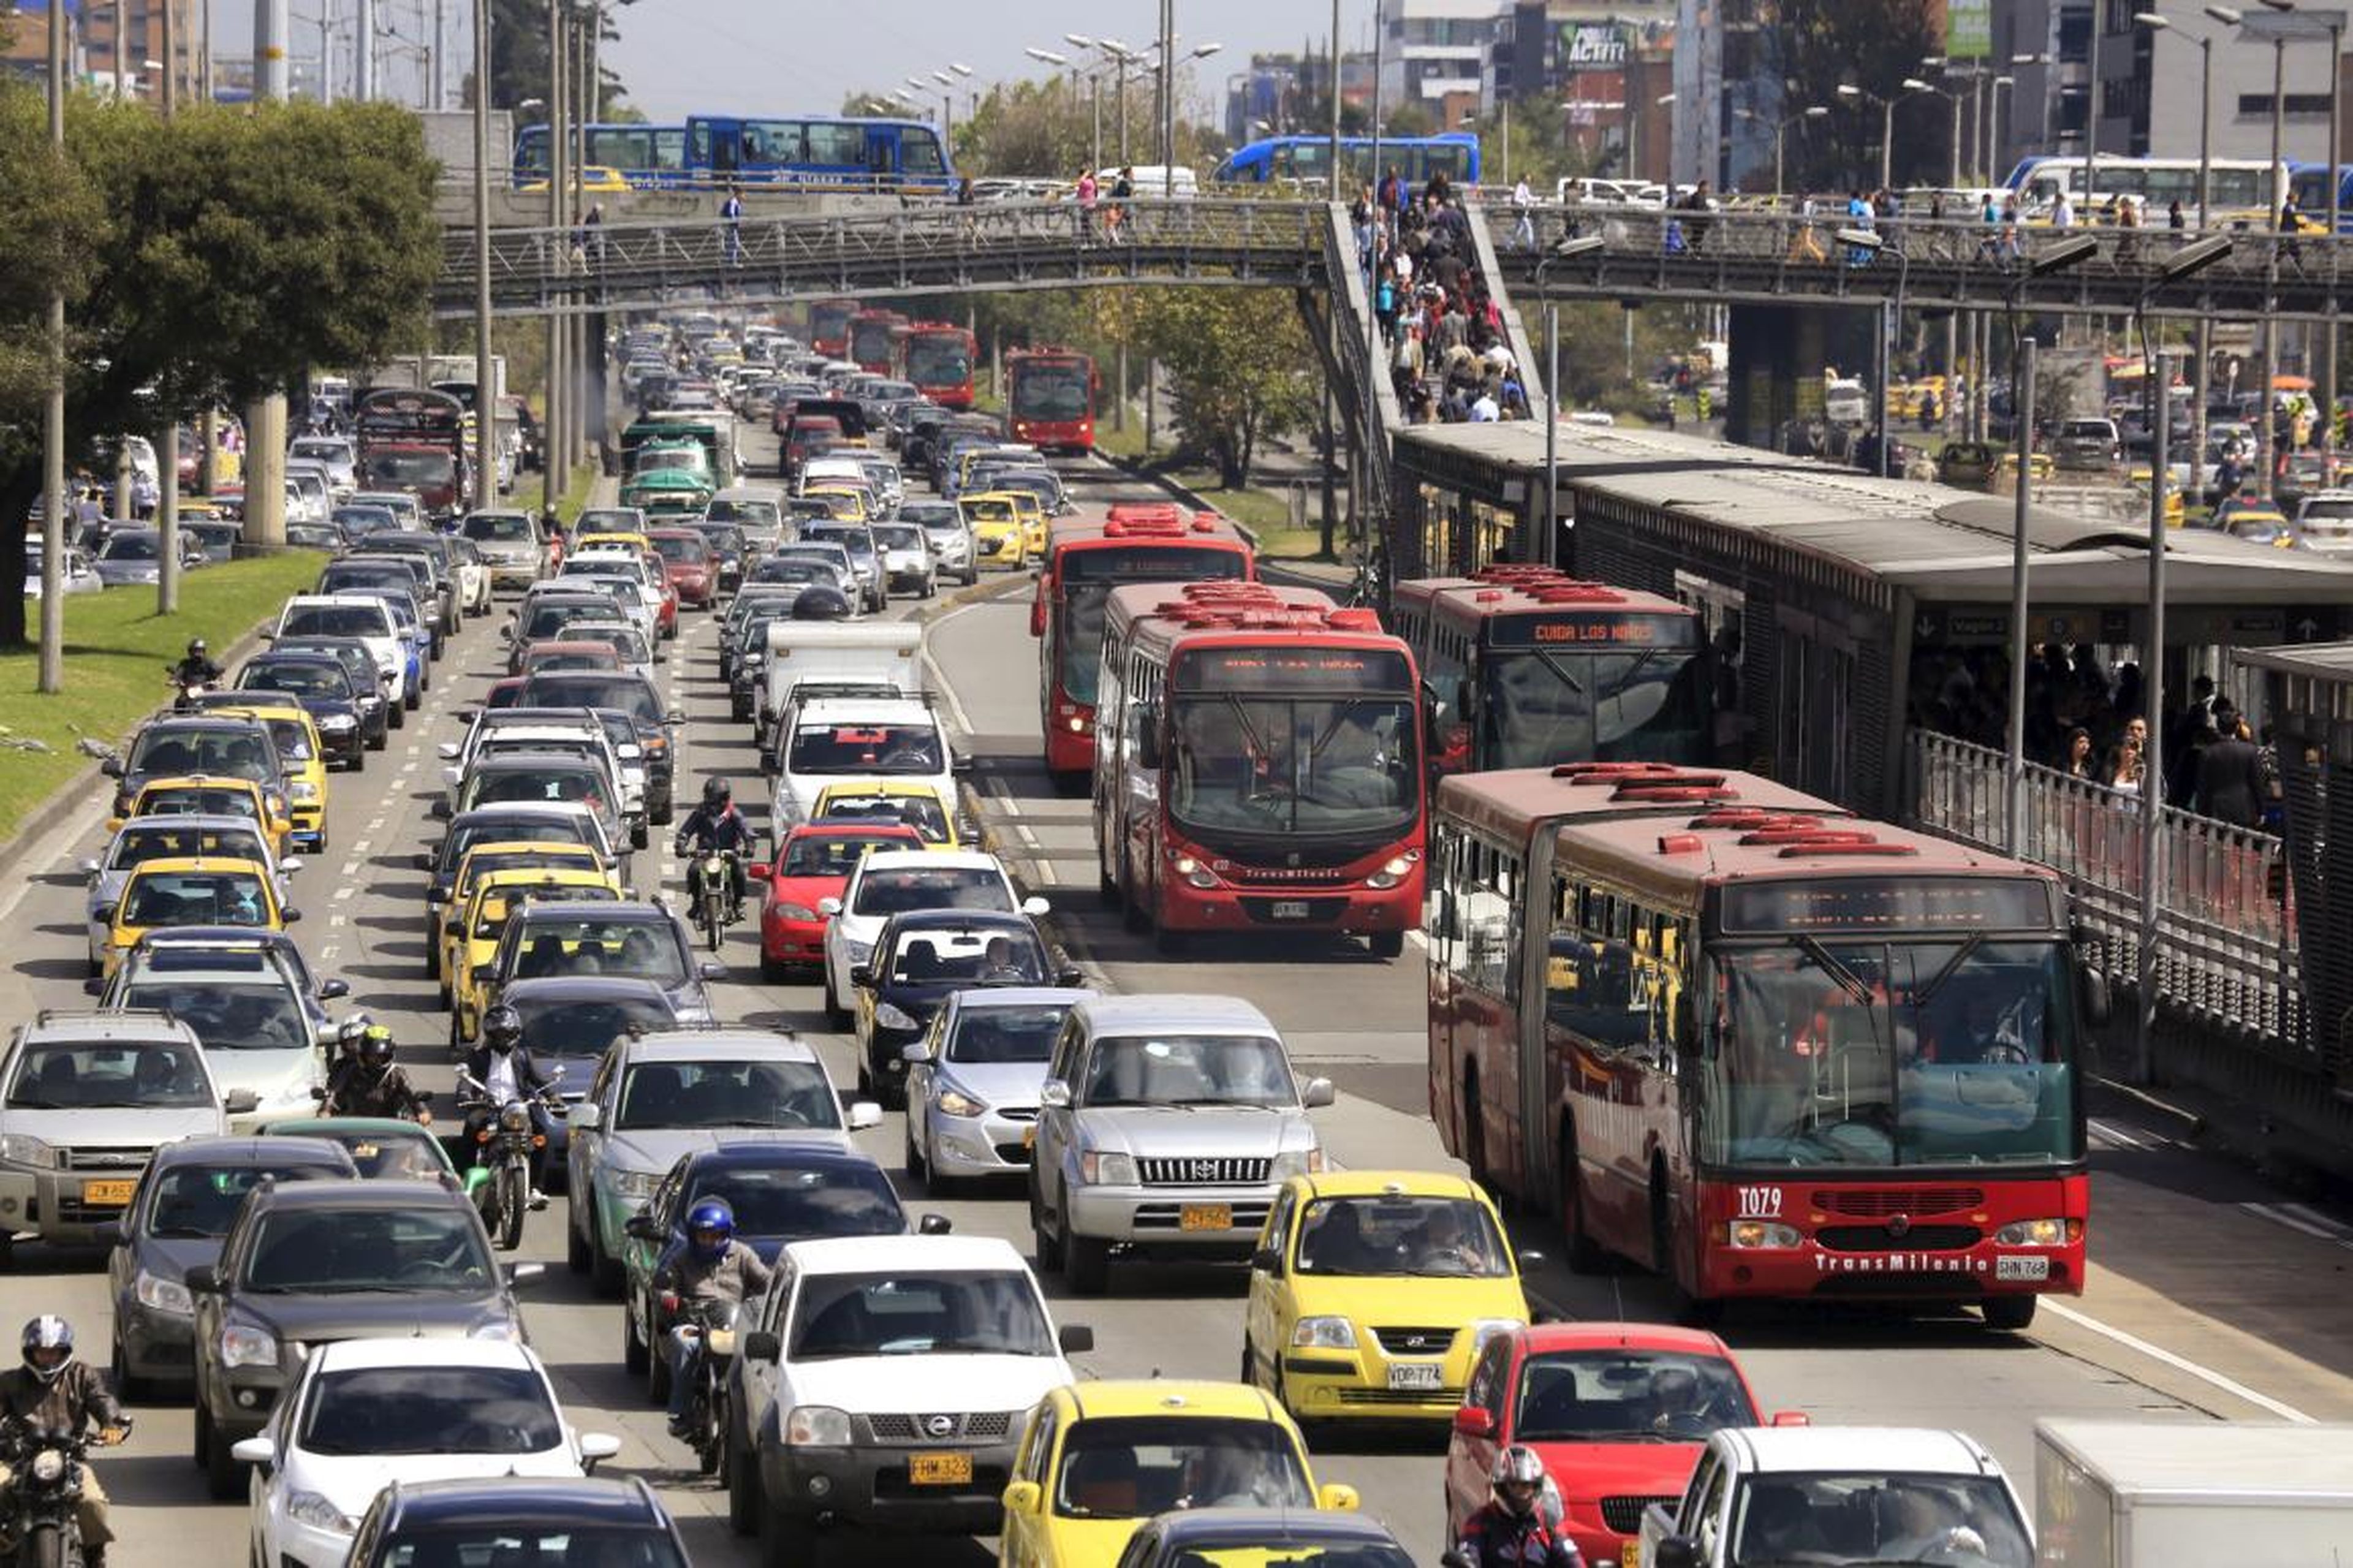 In a 2017 INRIX Global Traffic Scorecard, Bogota was ranked the 6th most congested in the world with drivers spending 30% of their time in traffic.